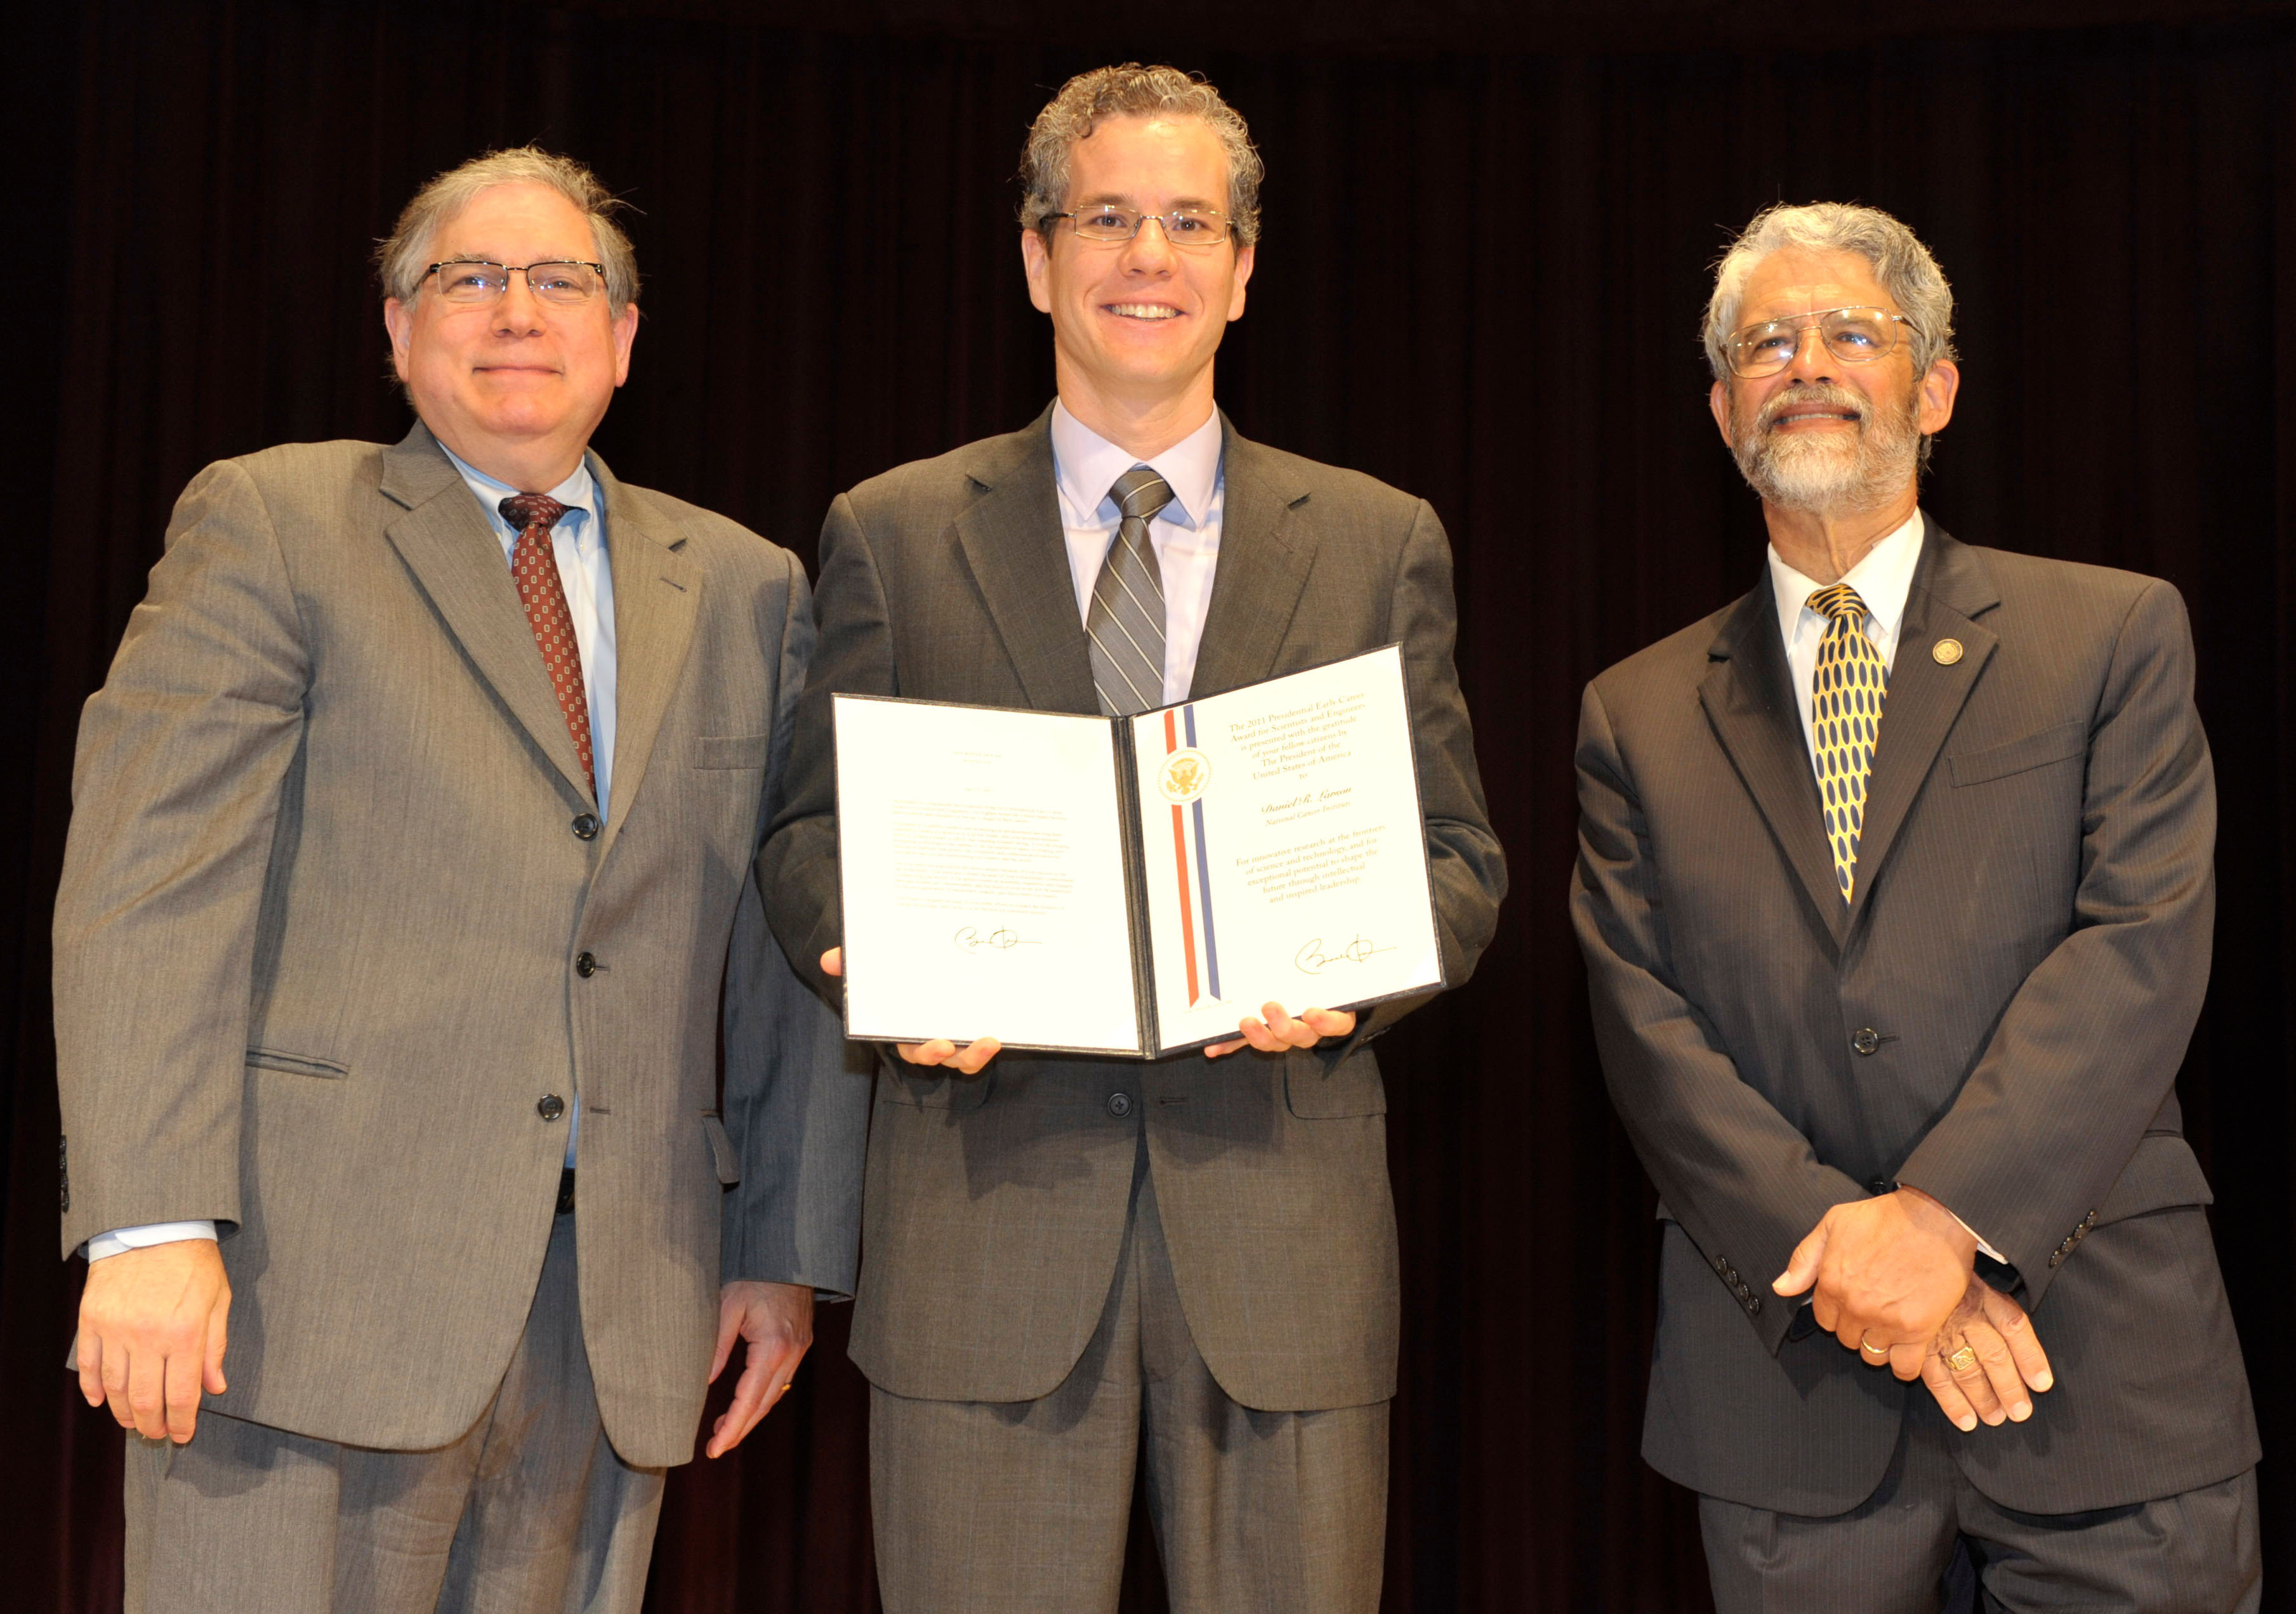 Dr. Larson stands between Dr. Tabak (left) and Dr. Holdren (right), while holding his award 